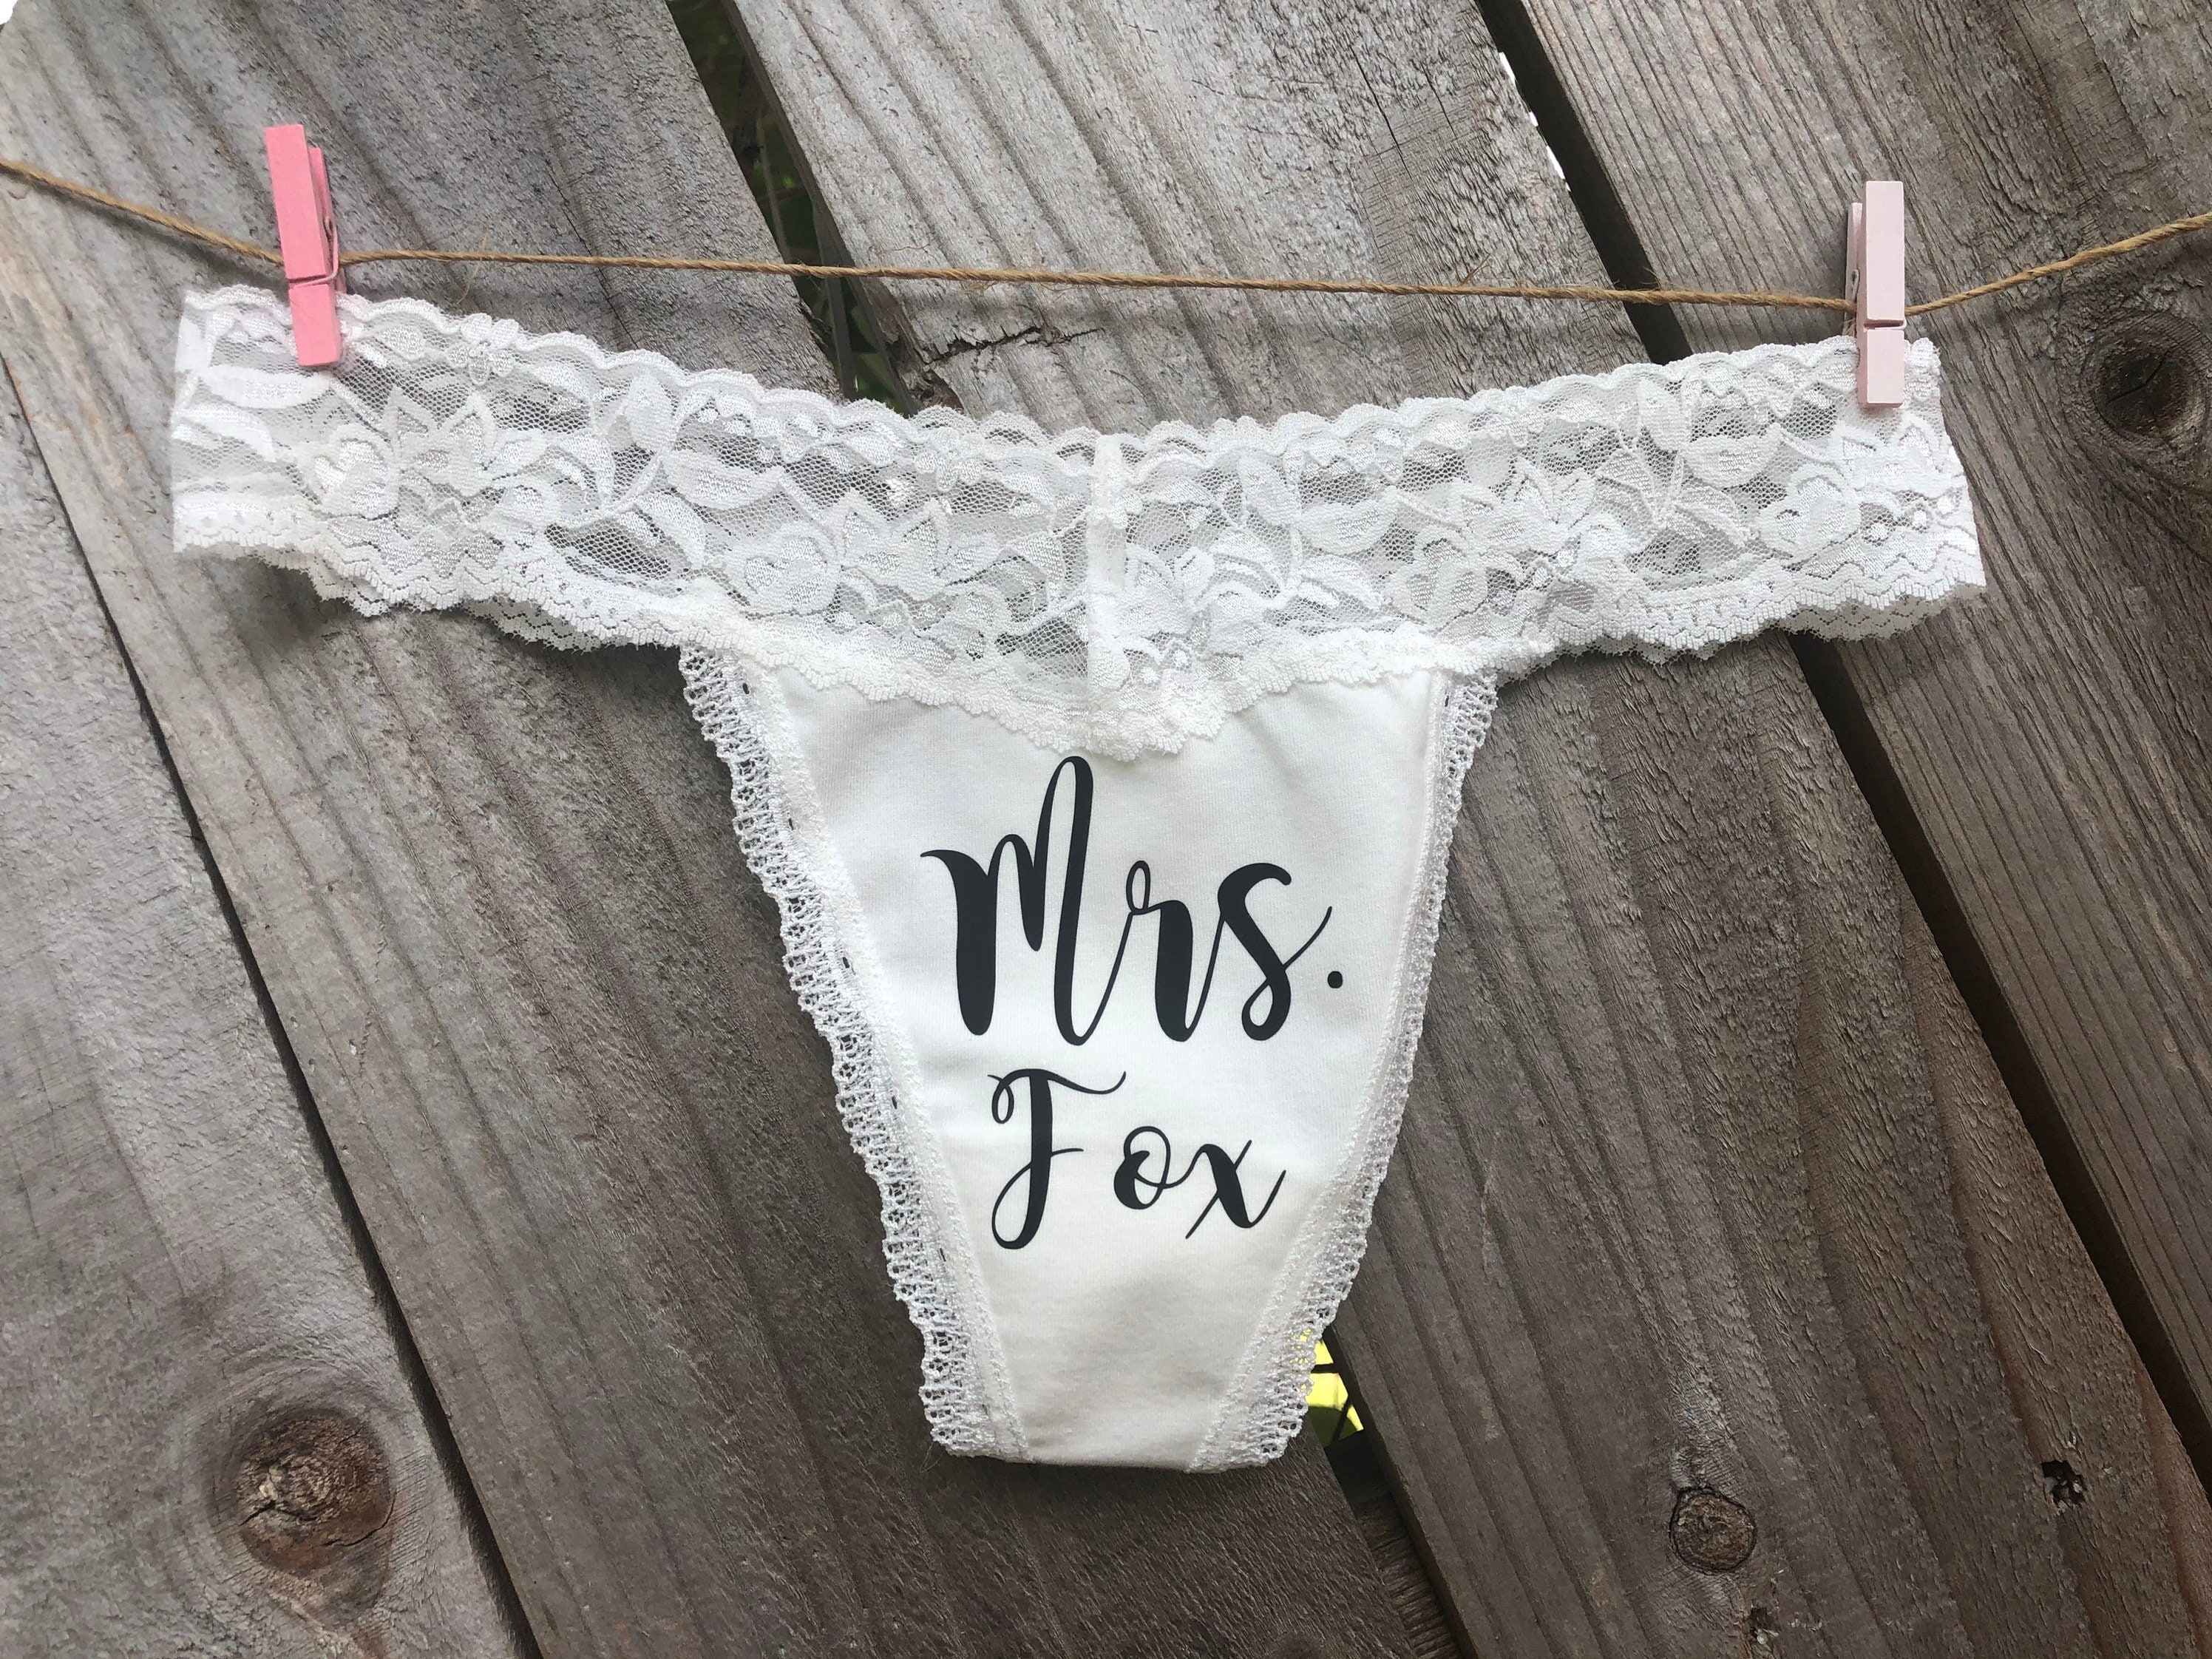 Sexy Panties Custom Lace Panty with Husband Face – GiftLab